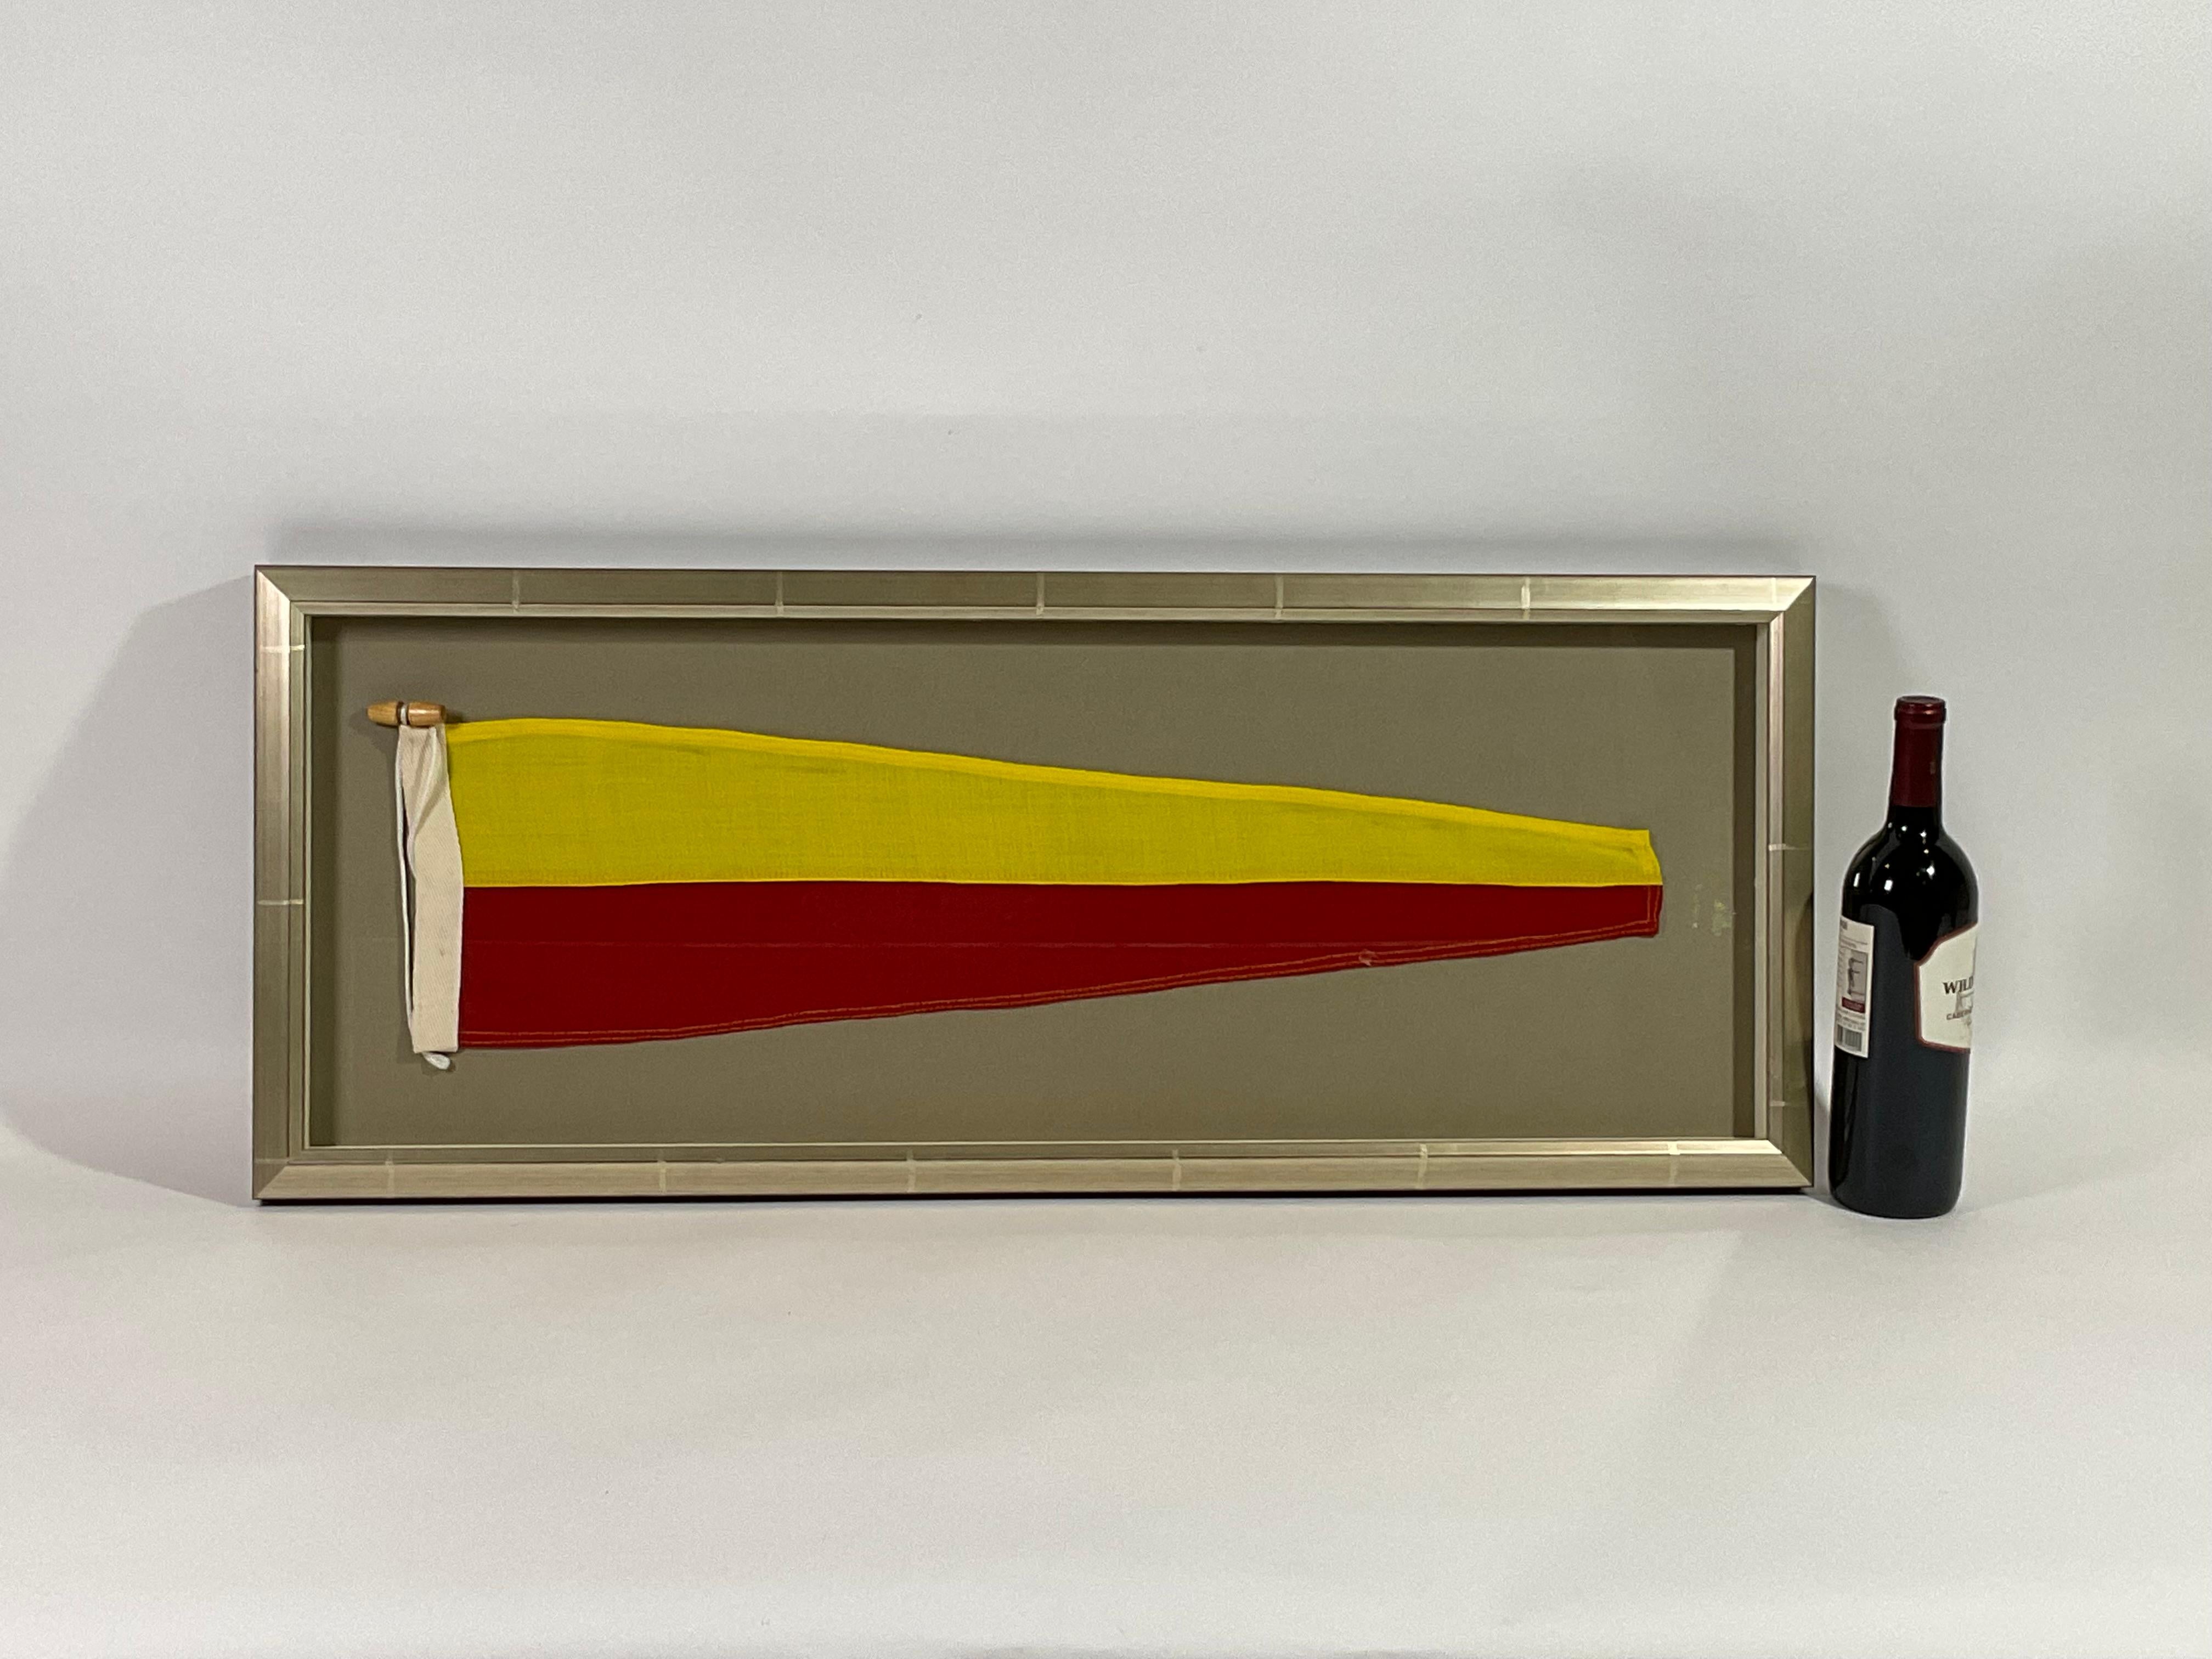 Framed maritime signal flag representing the number “7”, “SEVEN” in the international code of signals. This authentic pennant is made of individual panels of yellow and red. Fitted to a heavy canvas hoist band with original cord and wood toggle.